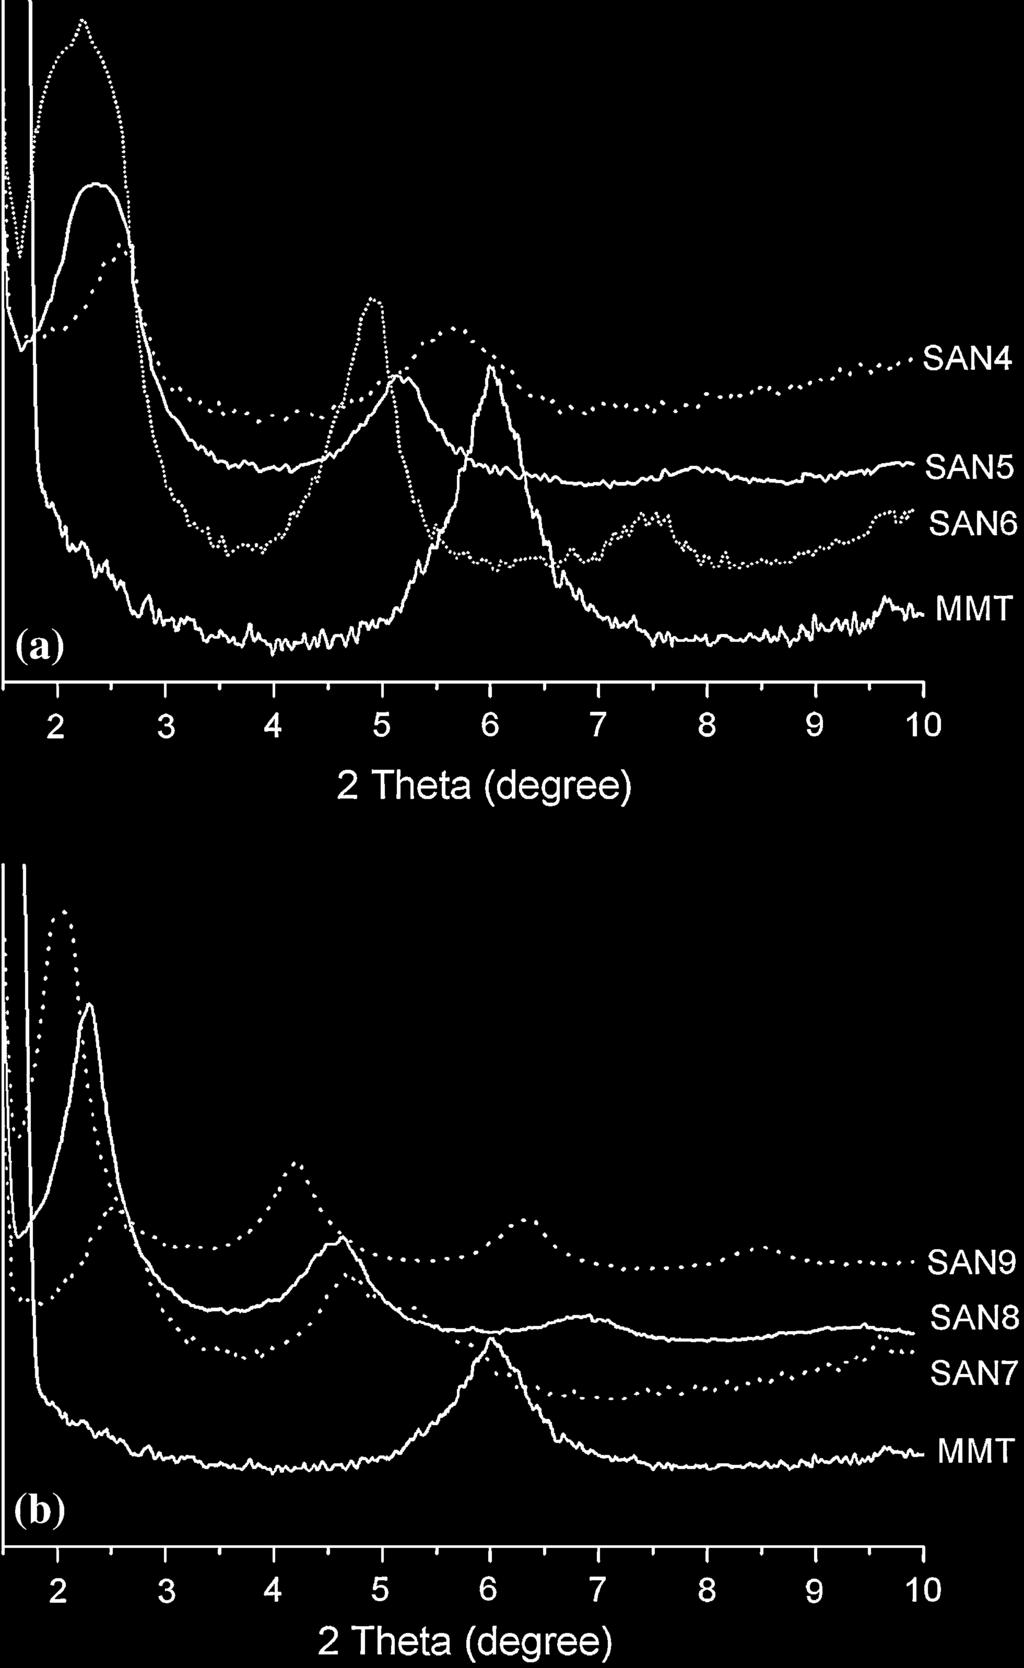 20]. Both the SAN/MMT/C16 and the SAN/MMT/P16 nanocomposites give well-dispersed clay dispersion, but the clay plate dimension is different.